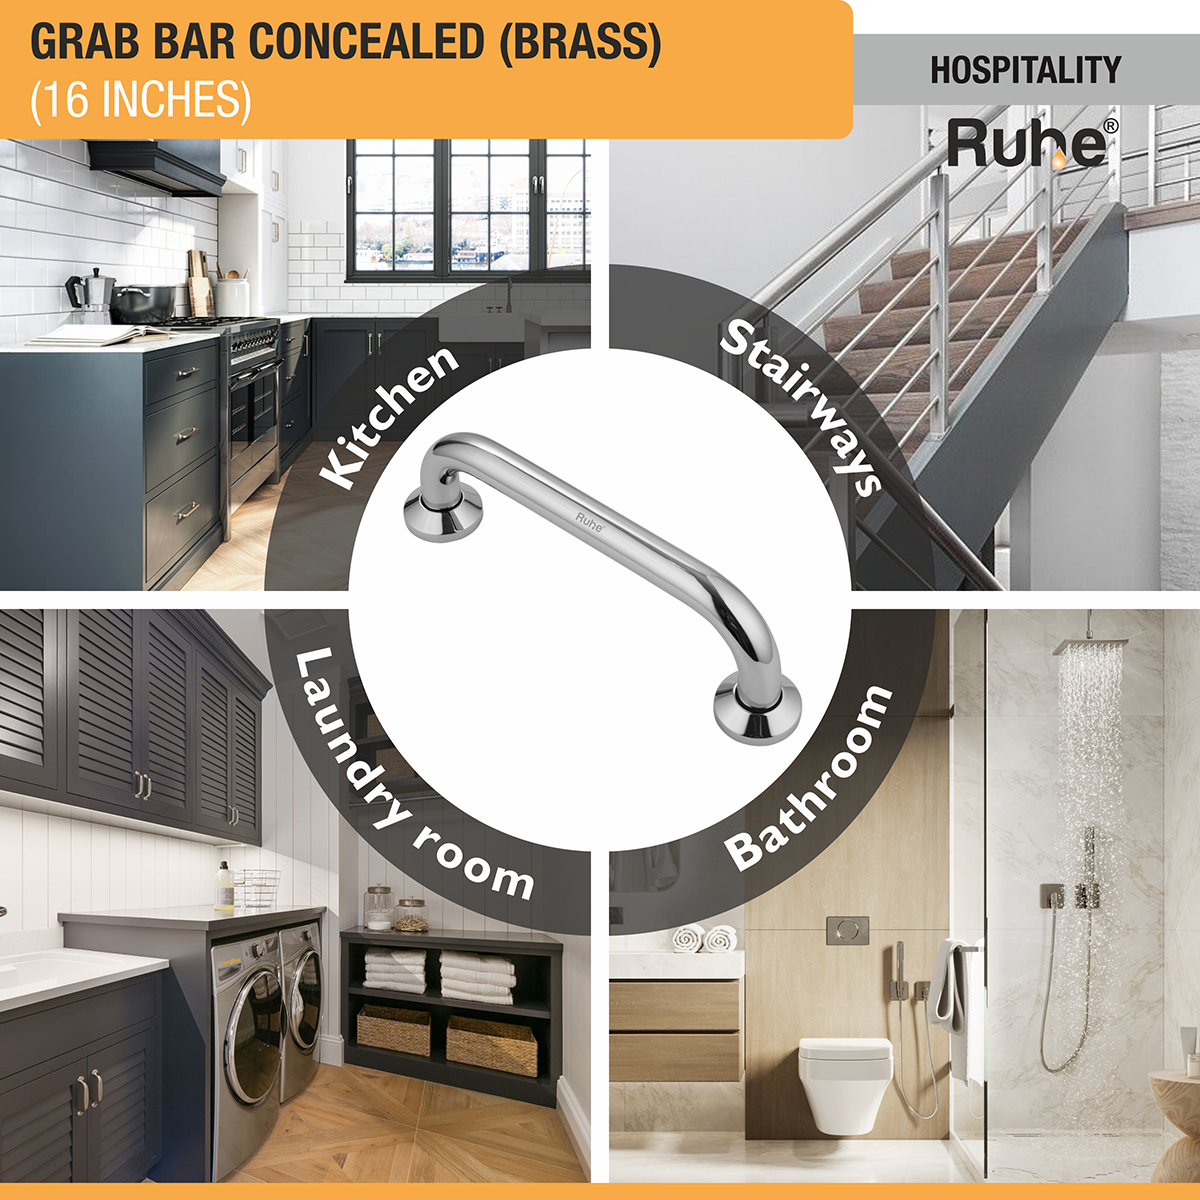 Brass Grab Bar Concealed (16 inches) with kitchen, stairways, laundry room, bathroom, washroom